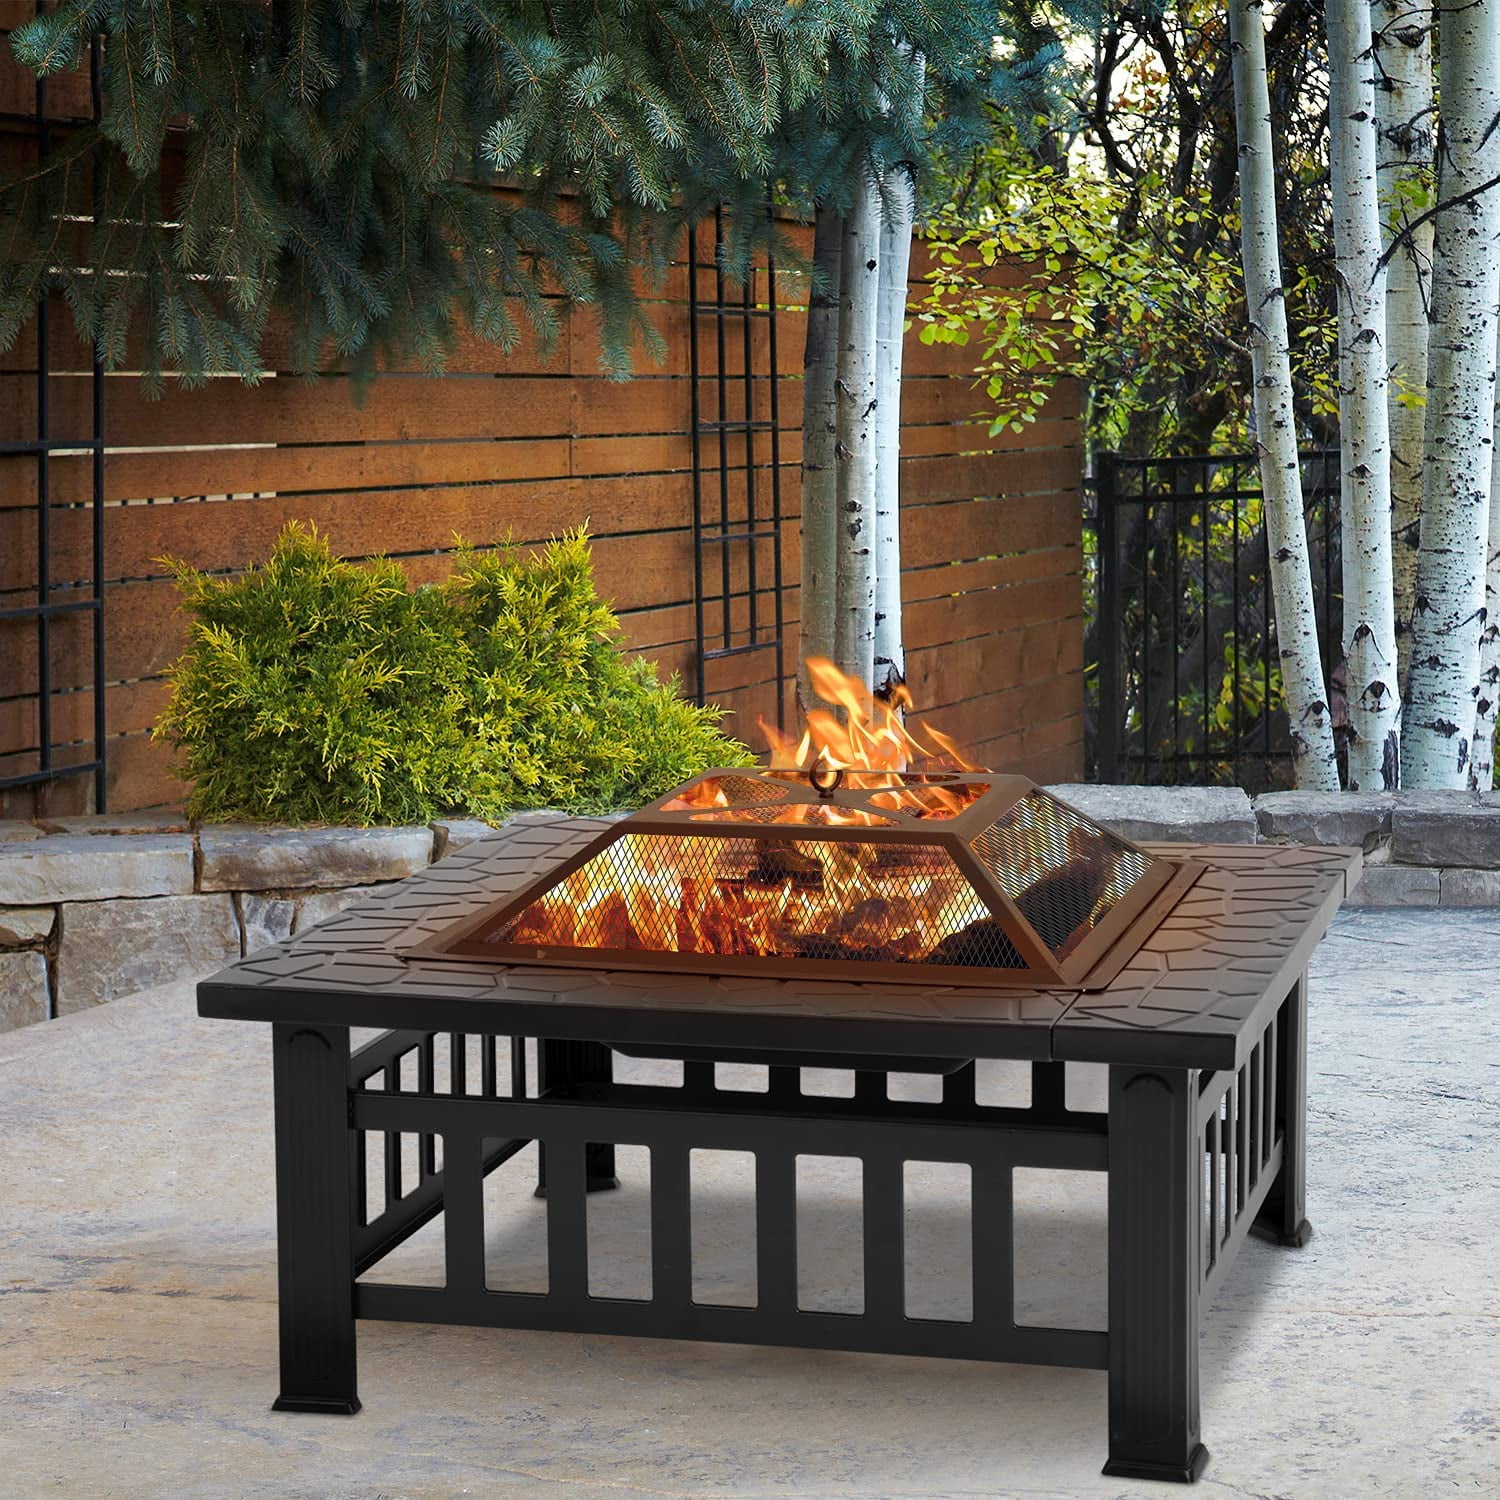 Fire Pit 32'' Wood Burning Firepit Metal Square Outdoor Fire Tables Steel BBQ Grill Fire Pit Bowl with Spark Screen Cover Poker Log Grate for Patio Bonfire Camping Backyard Garden Picnic 